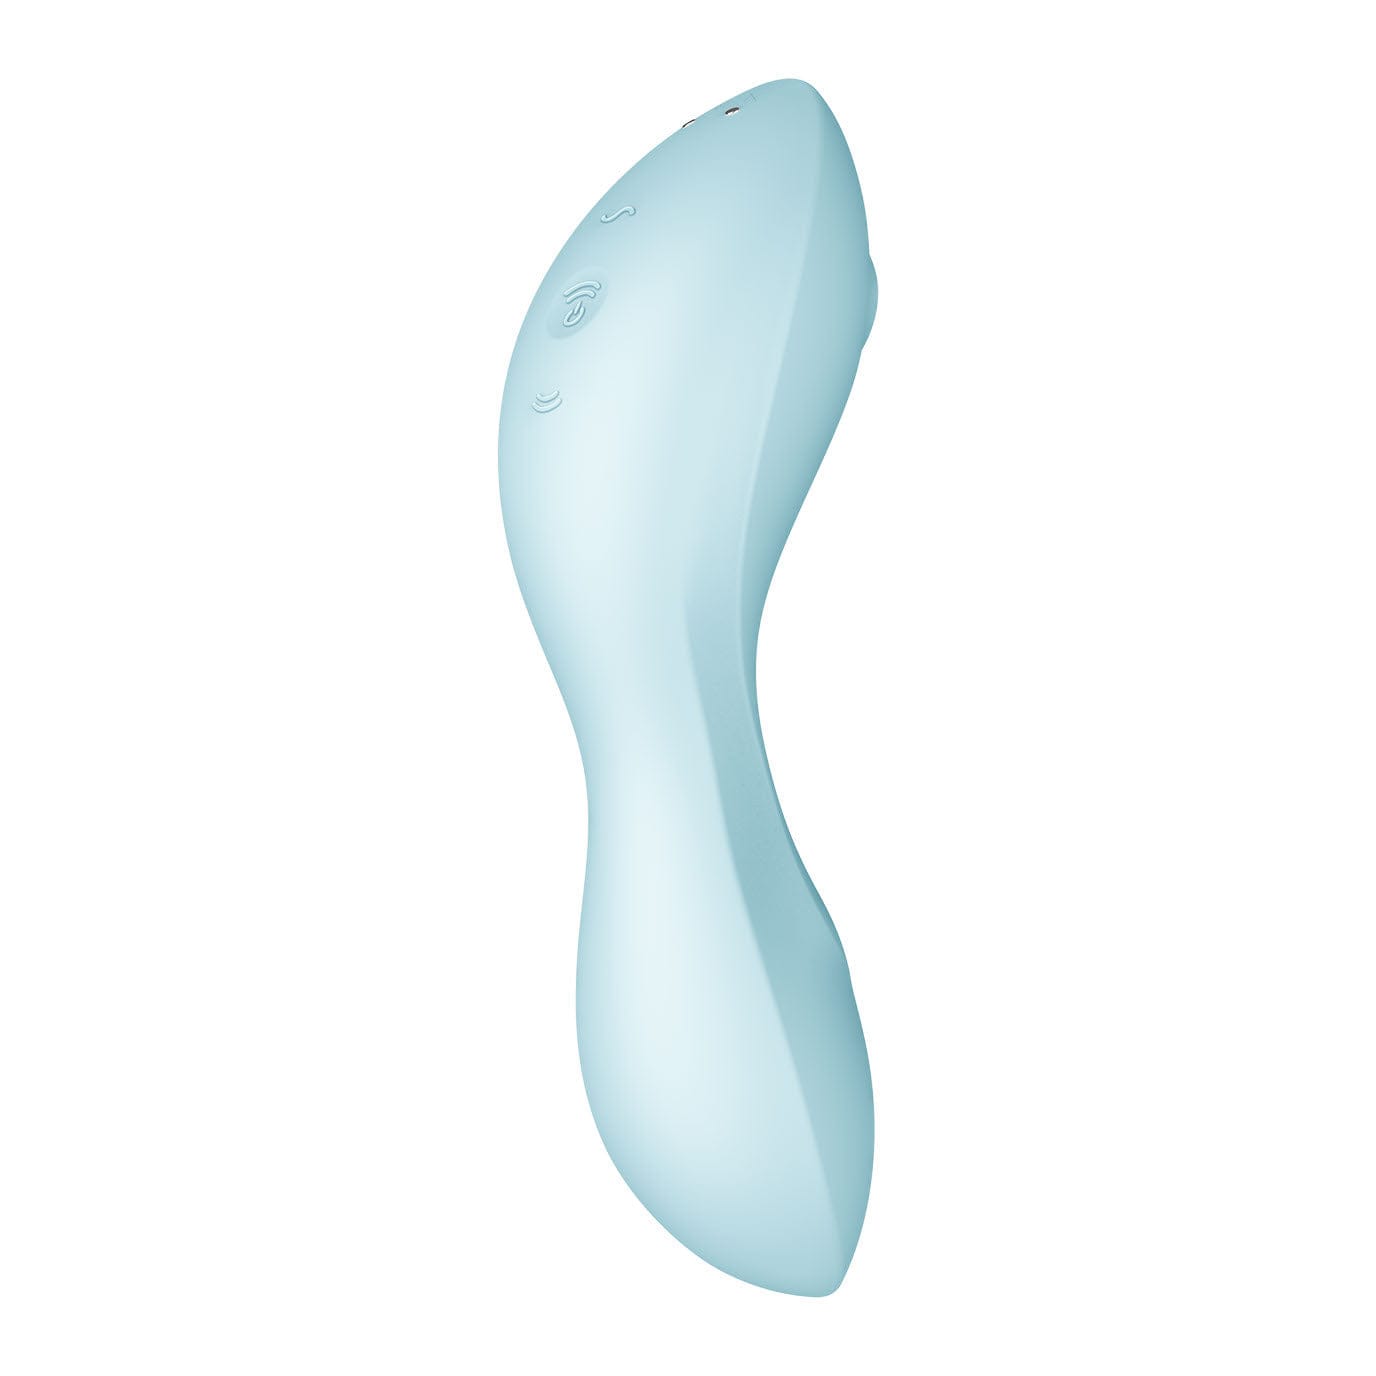 Satisfyer - Curvy App-Controlled Trinity 5 Clitoral Air Stimulator Vibrator (Light Blue) Clit Massager (Vibration) Rechargeable 4061504036564 CherryAffairs